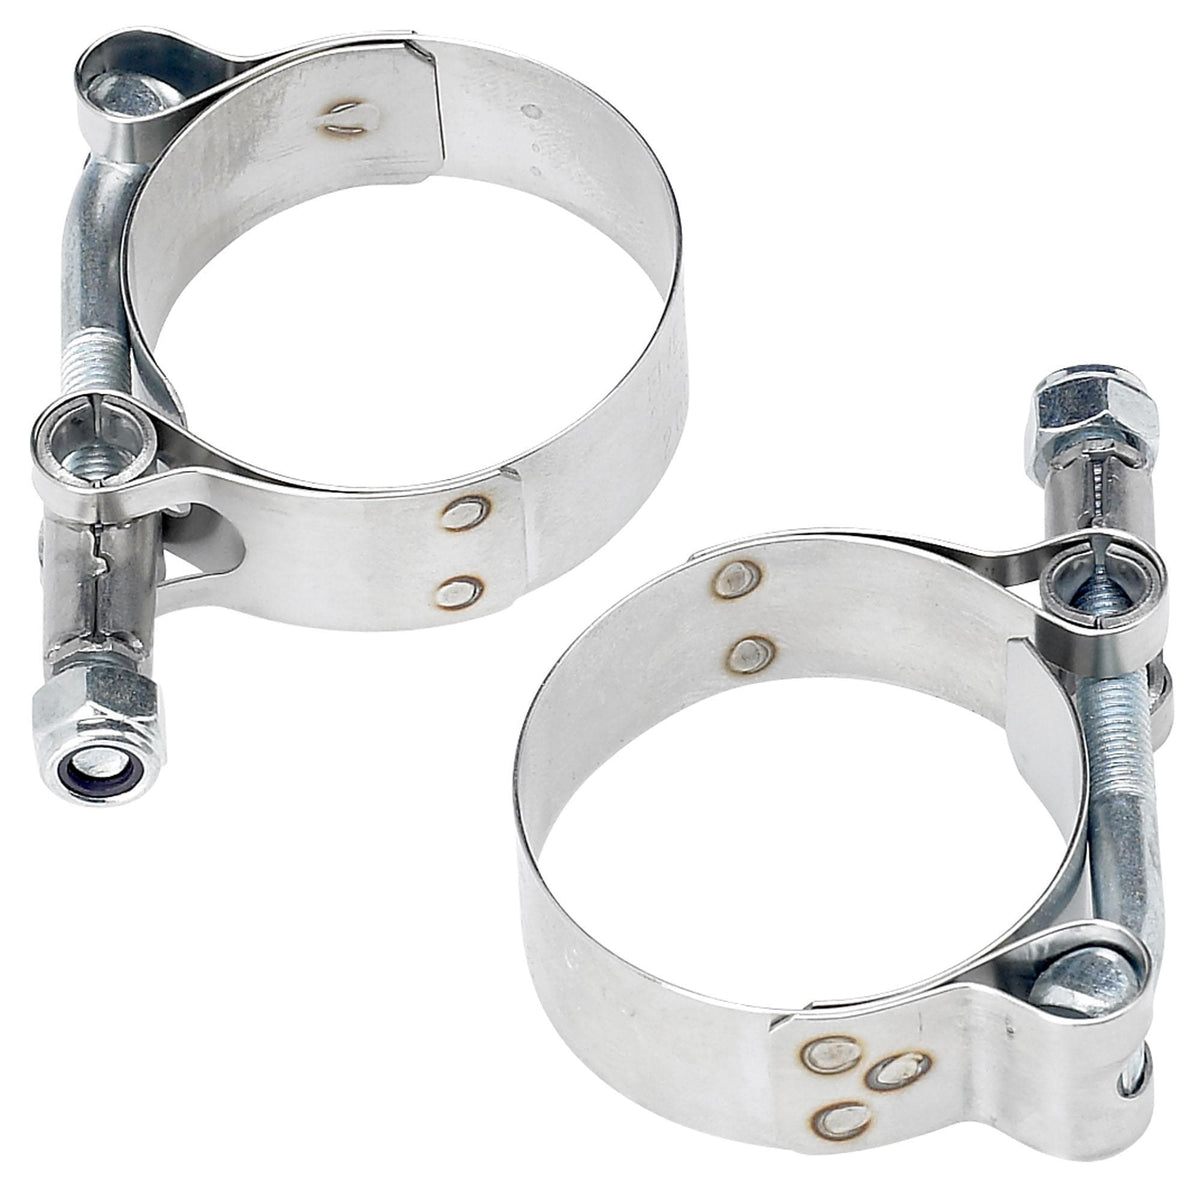 Exhaust clamp chrome steel 45 mm (13⁄4 inch) for Harley Davidson universal